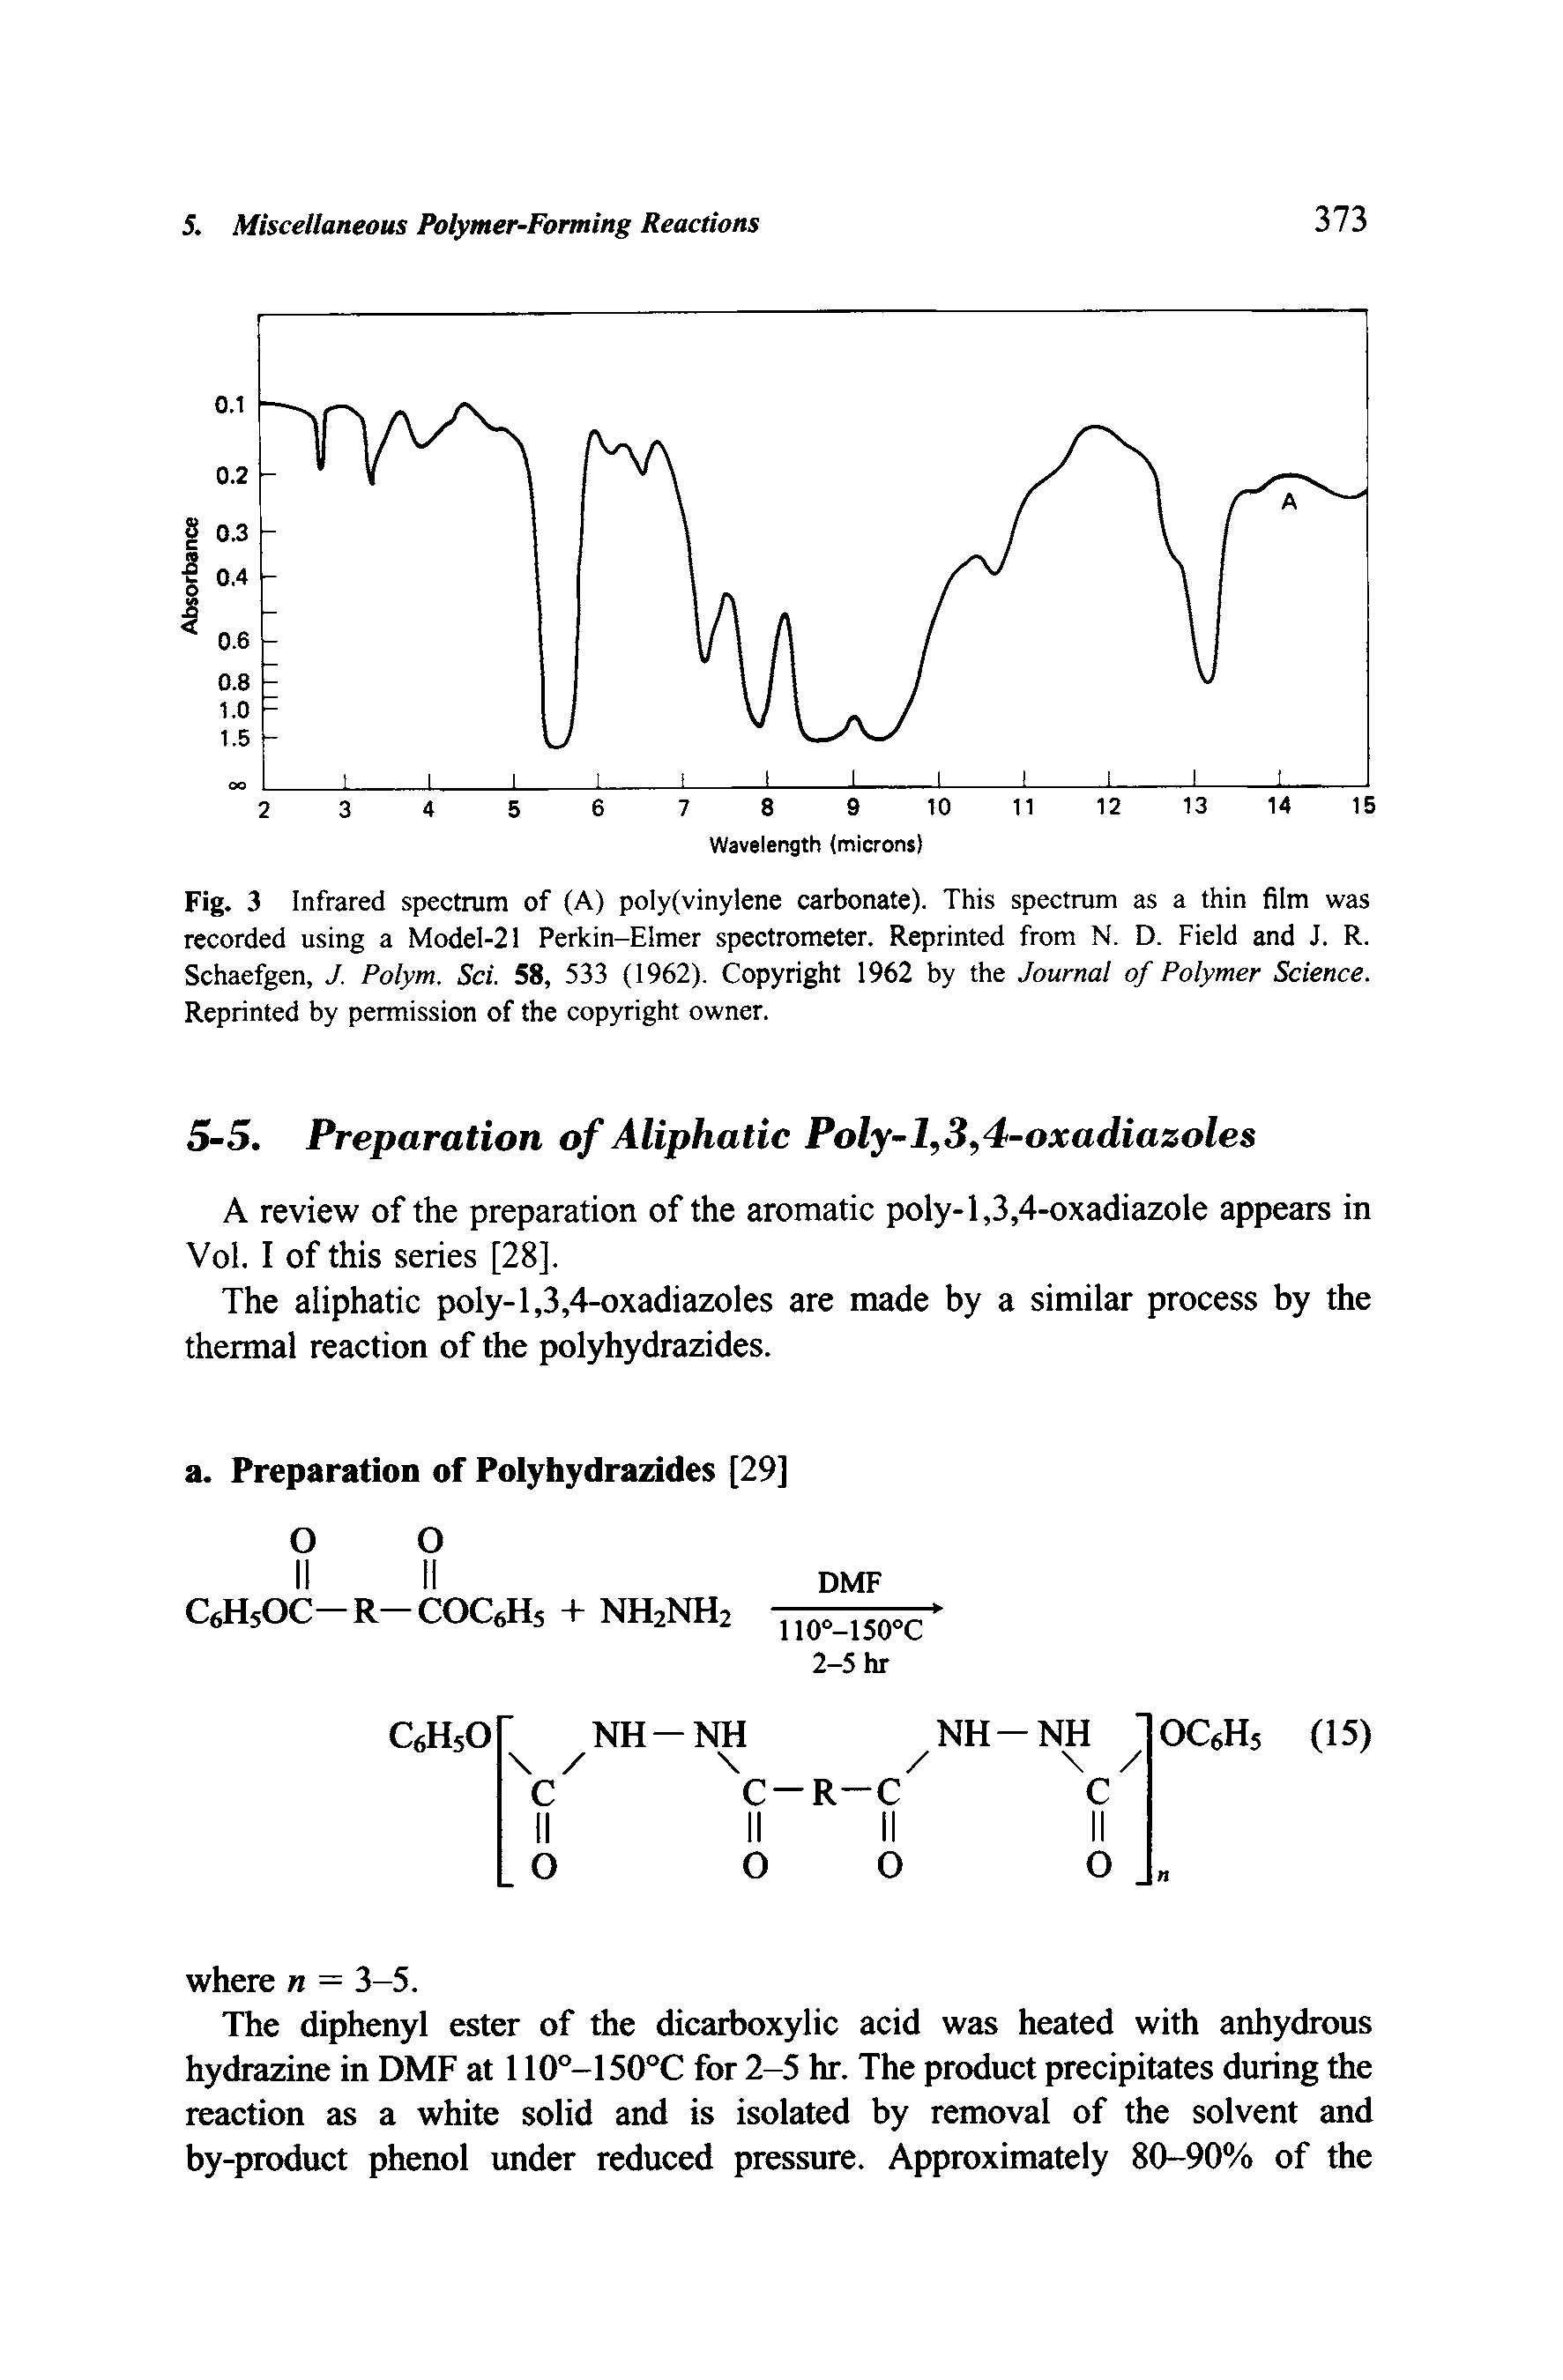 Fig. 3 Infrared spectrum of (A) poly(vinylene carbonate). This spectrum as a thin film was recorded using a ModeI-21 Perkin-Elmer spectrometer. Reprinted from N. D. Field and J. R. Schaefgen, J. Polym. Sci. 58, 533 (1962). Copyright 1962 by the Journal of Polymer Science. Reprinted by permission of the copyright owner.